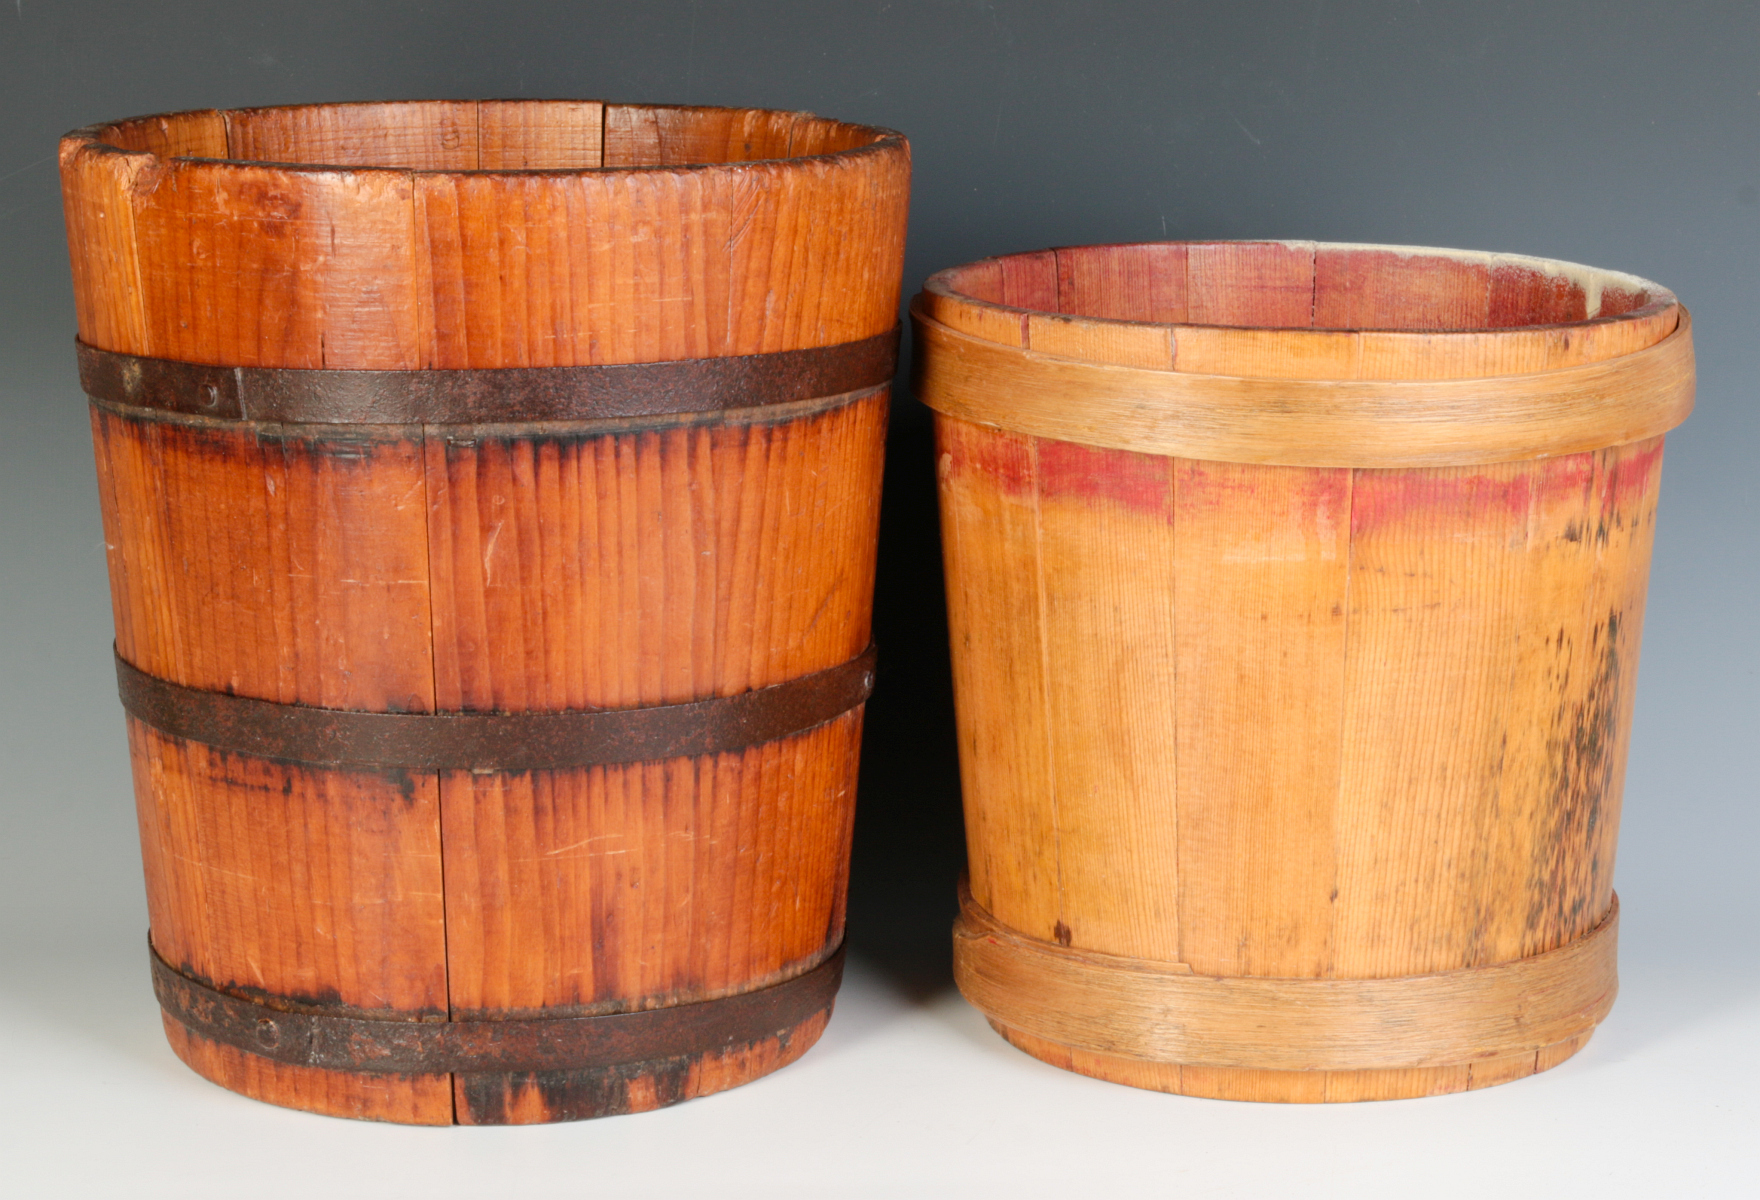 TWO 19TH CENTURY STAVE CONSTRUCTION CONTAINERS